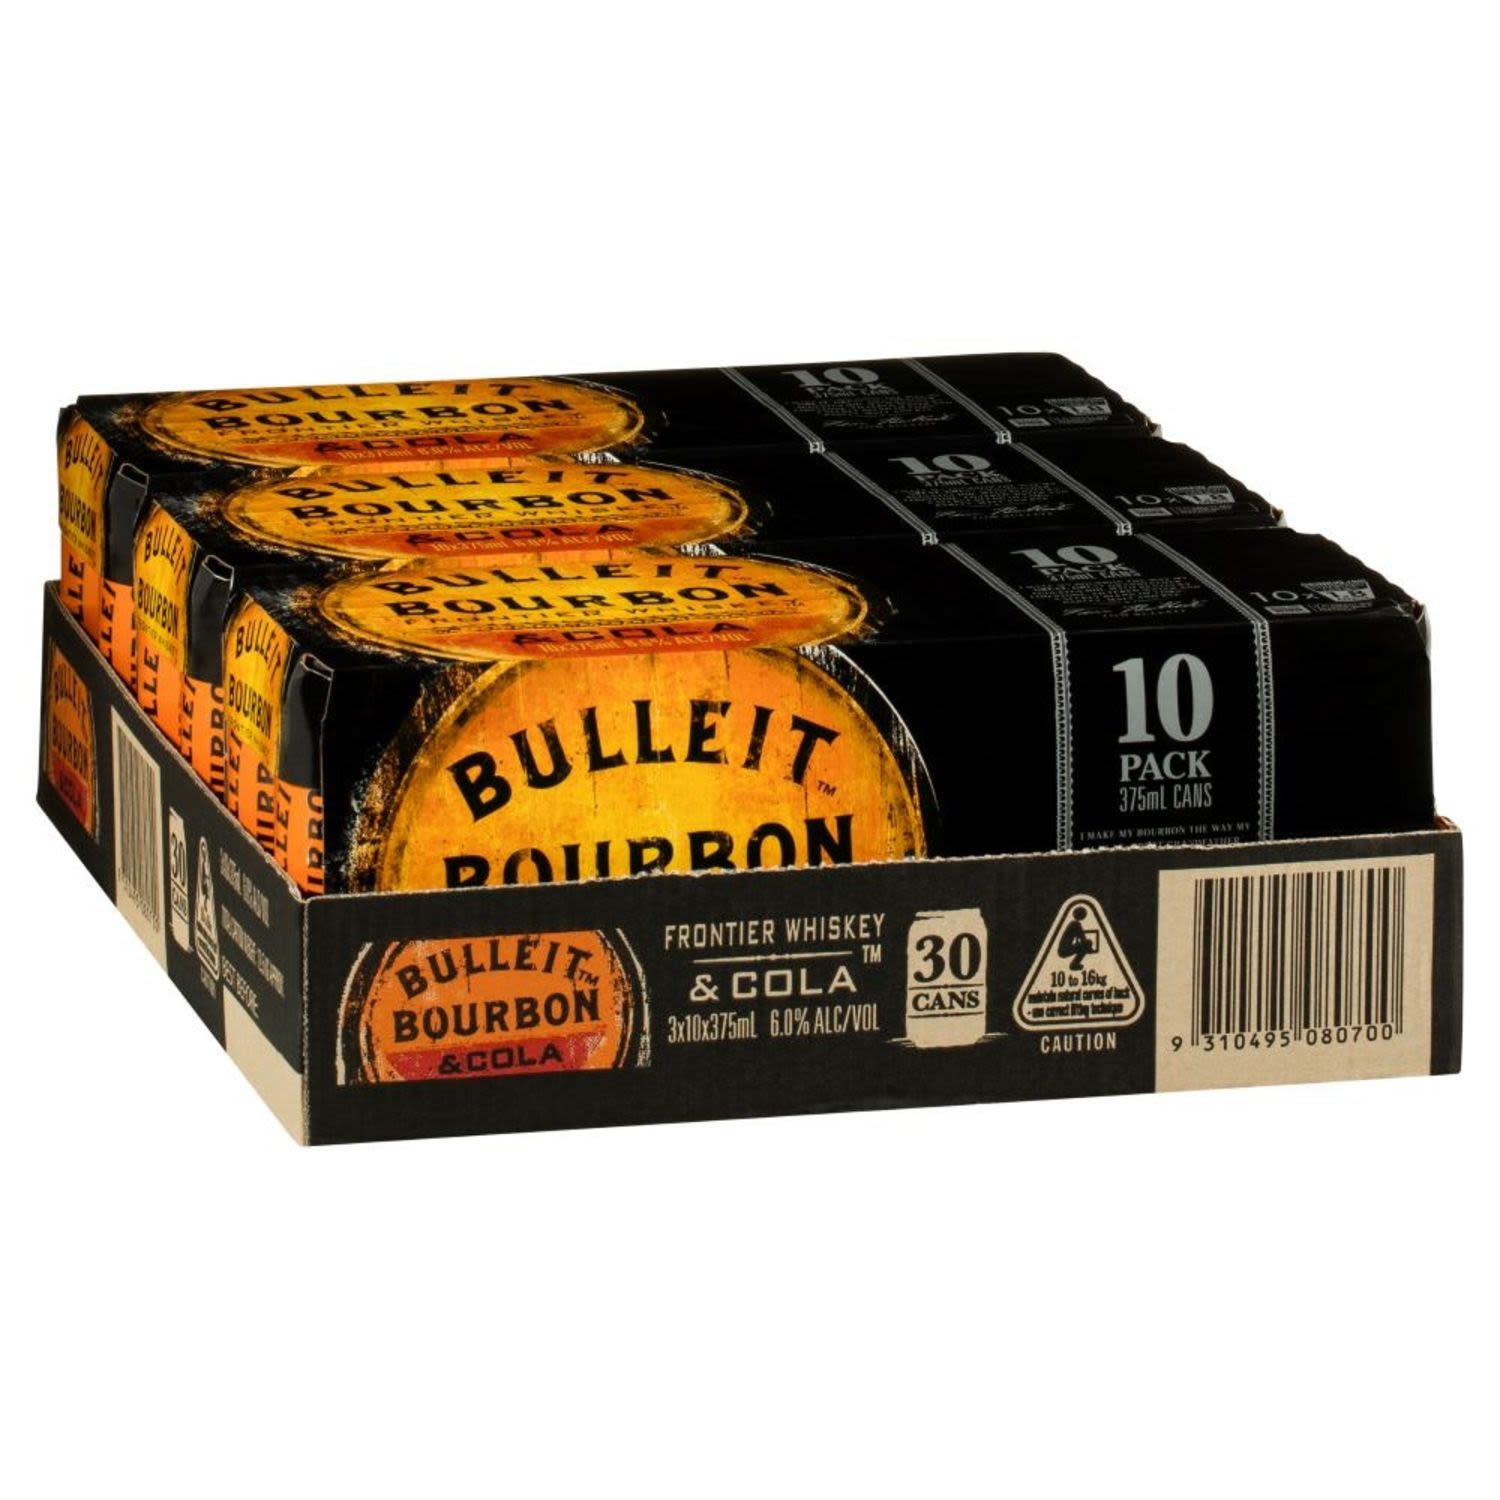 One of the driest of all bourbons, delivering a full-bodied and spicy taste with a long, smooth finish. Now pre-mixed in a can with cola ready for your convenience and enjoyment.<br /> <br />Alcohol Volume: 6.00%<br /><br />Pack Format: 30 Pack<br /><br />Standard Drinks: 1.8</br /><br />Pack Type: Can<br />